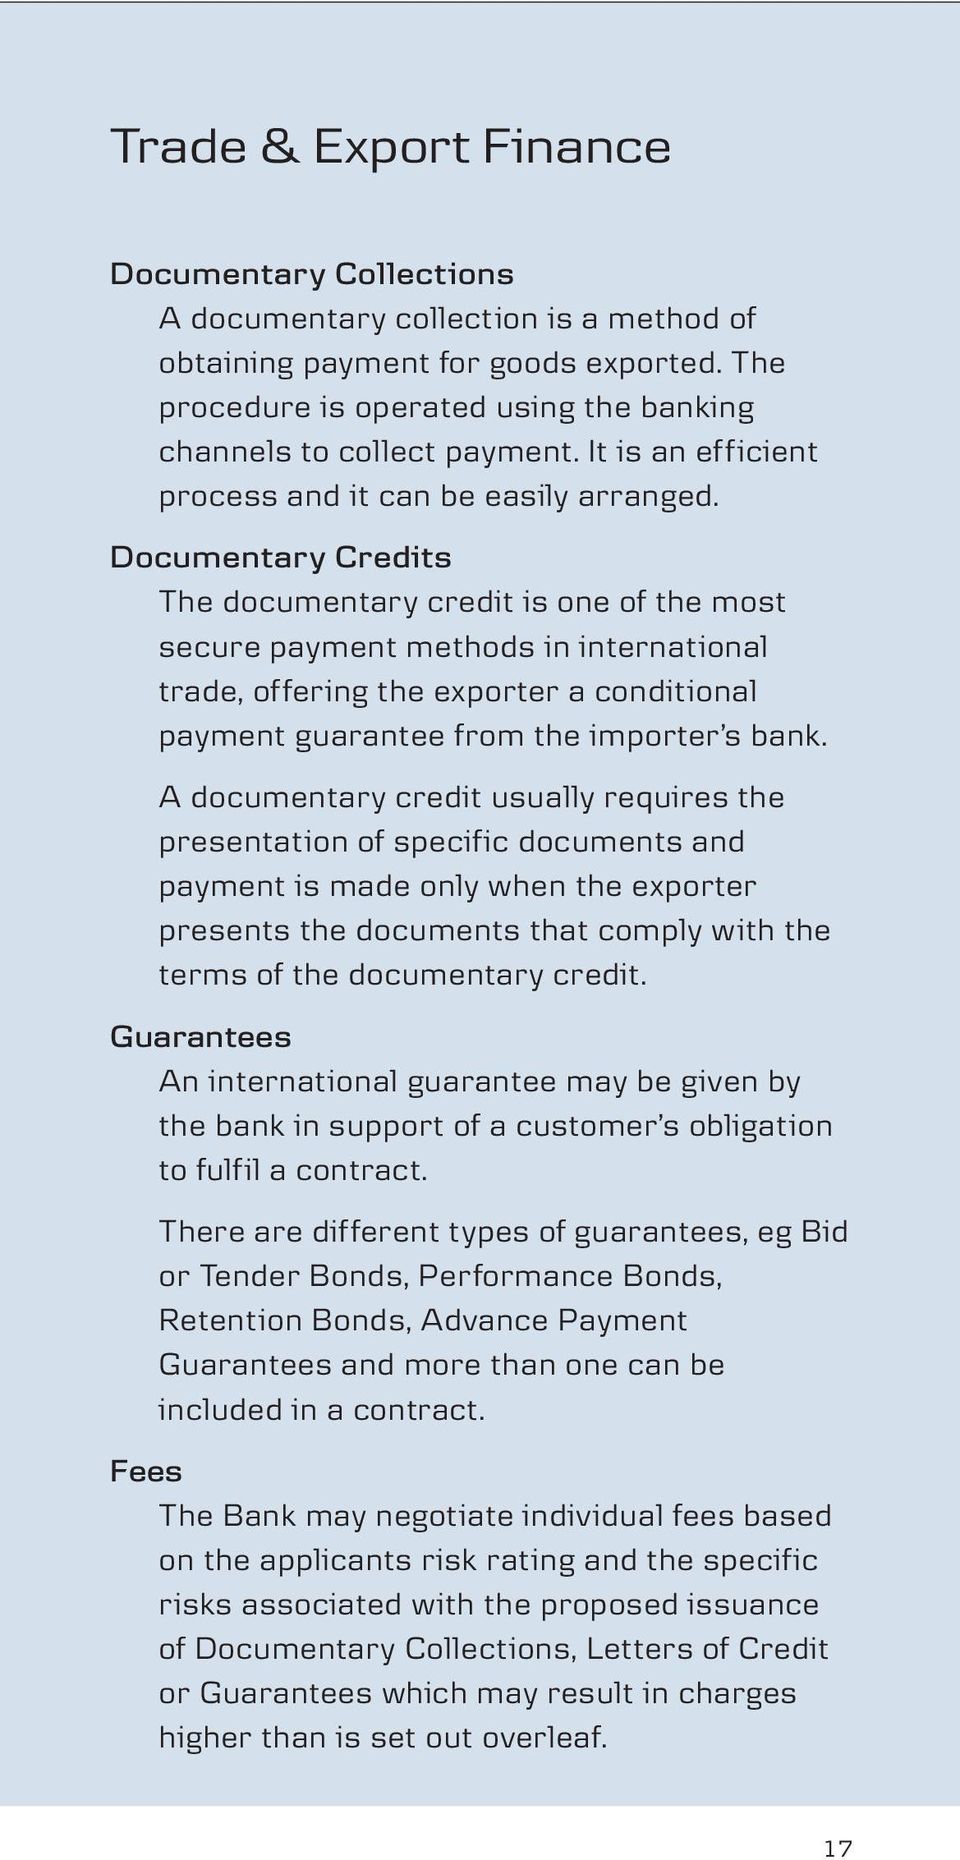 Documentary Credits The documentary credit is one of the most secure payment methods in international trade, offering the exporter a conditional payment guarantee from the importer s bank.